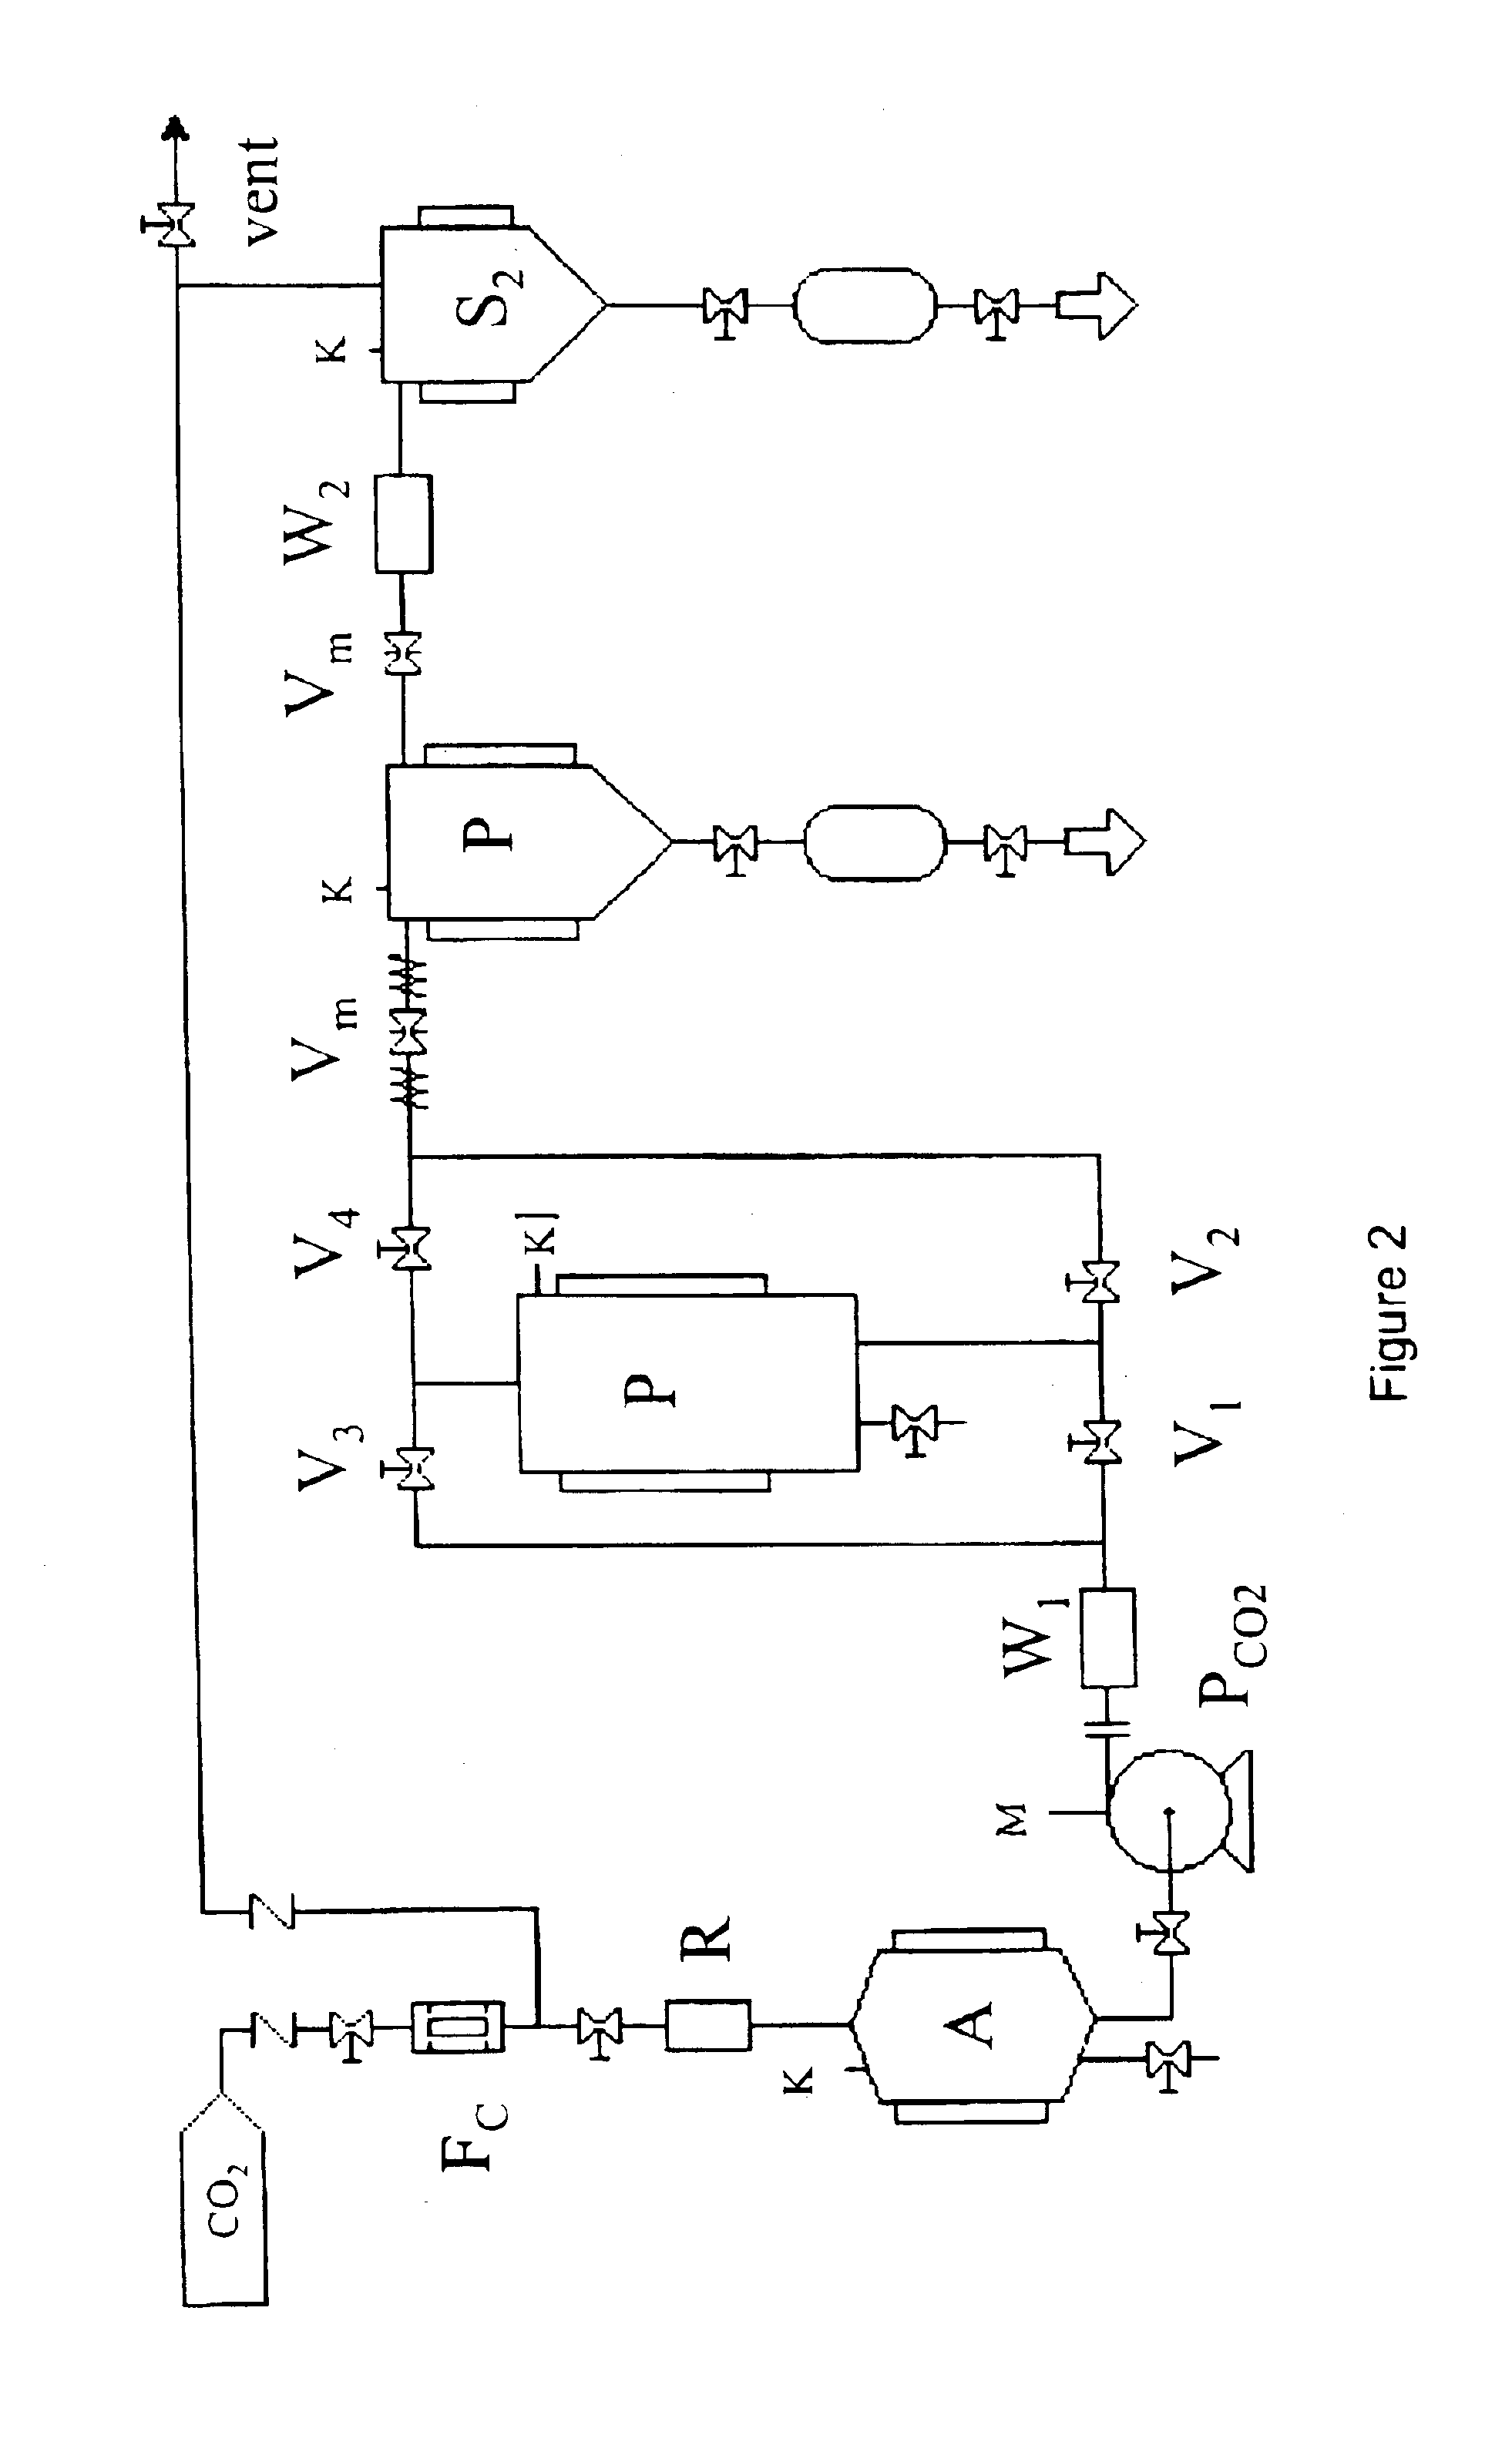 Process for the preparation of accelerated release formulations using compressed fluids